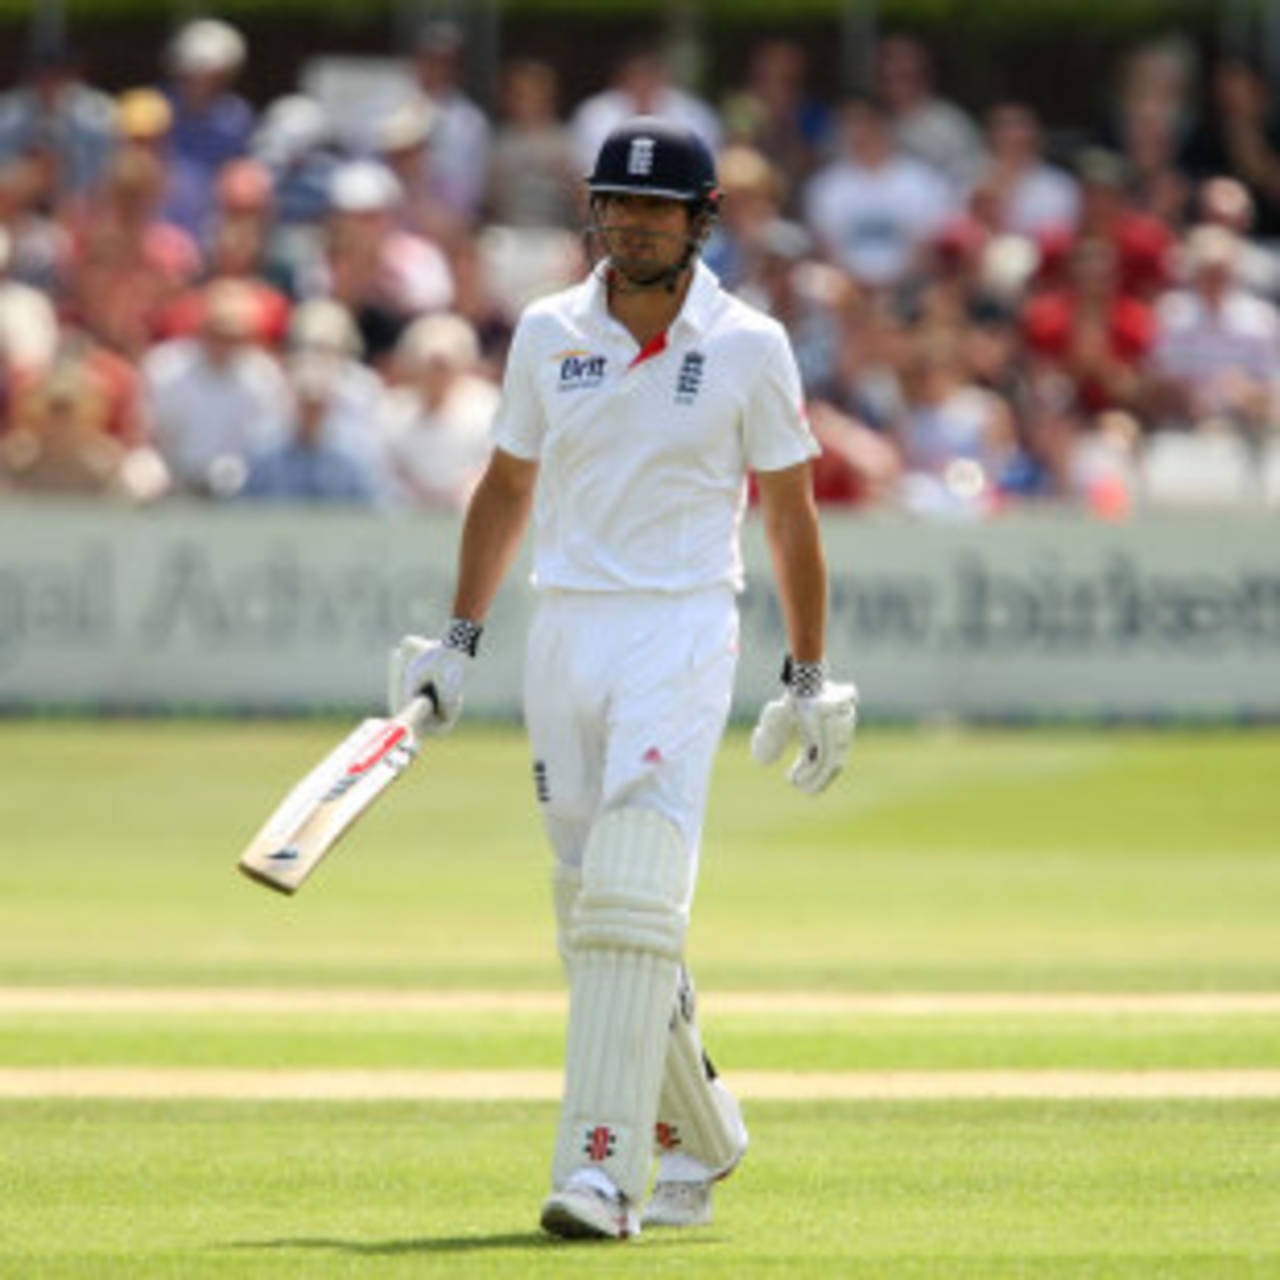 Alastair Cook has a highest of 43 not out in 11 Test innings at Trent Bridge, and an average of 19.50&nbsp;&nbsp;&bull;&nbsp;&nbsp;Getty Images